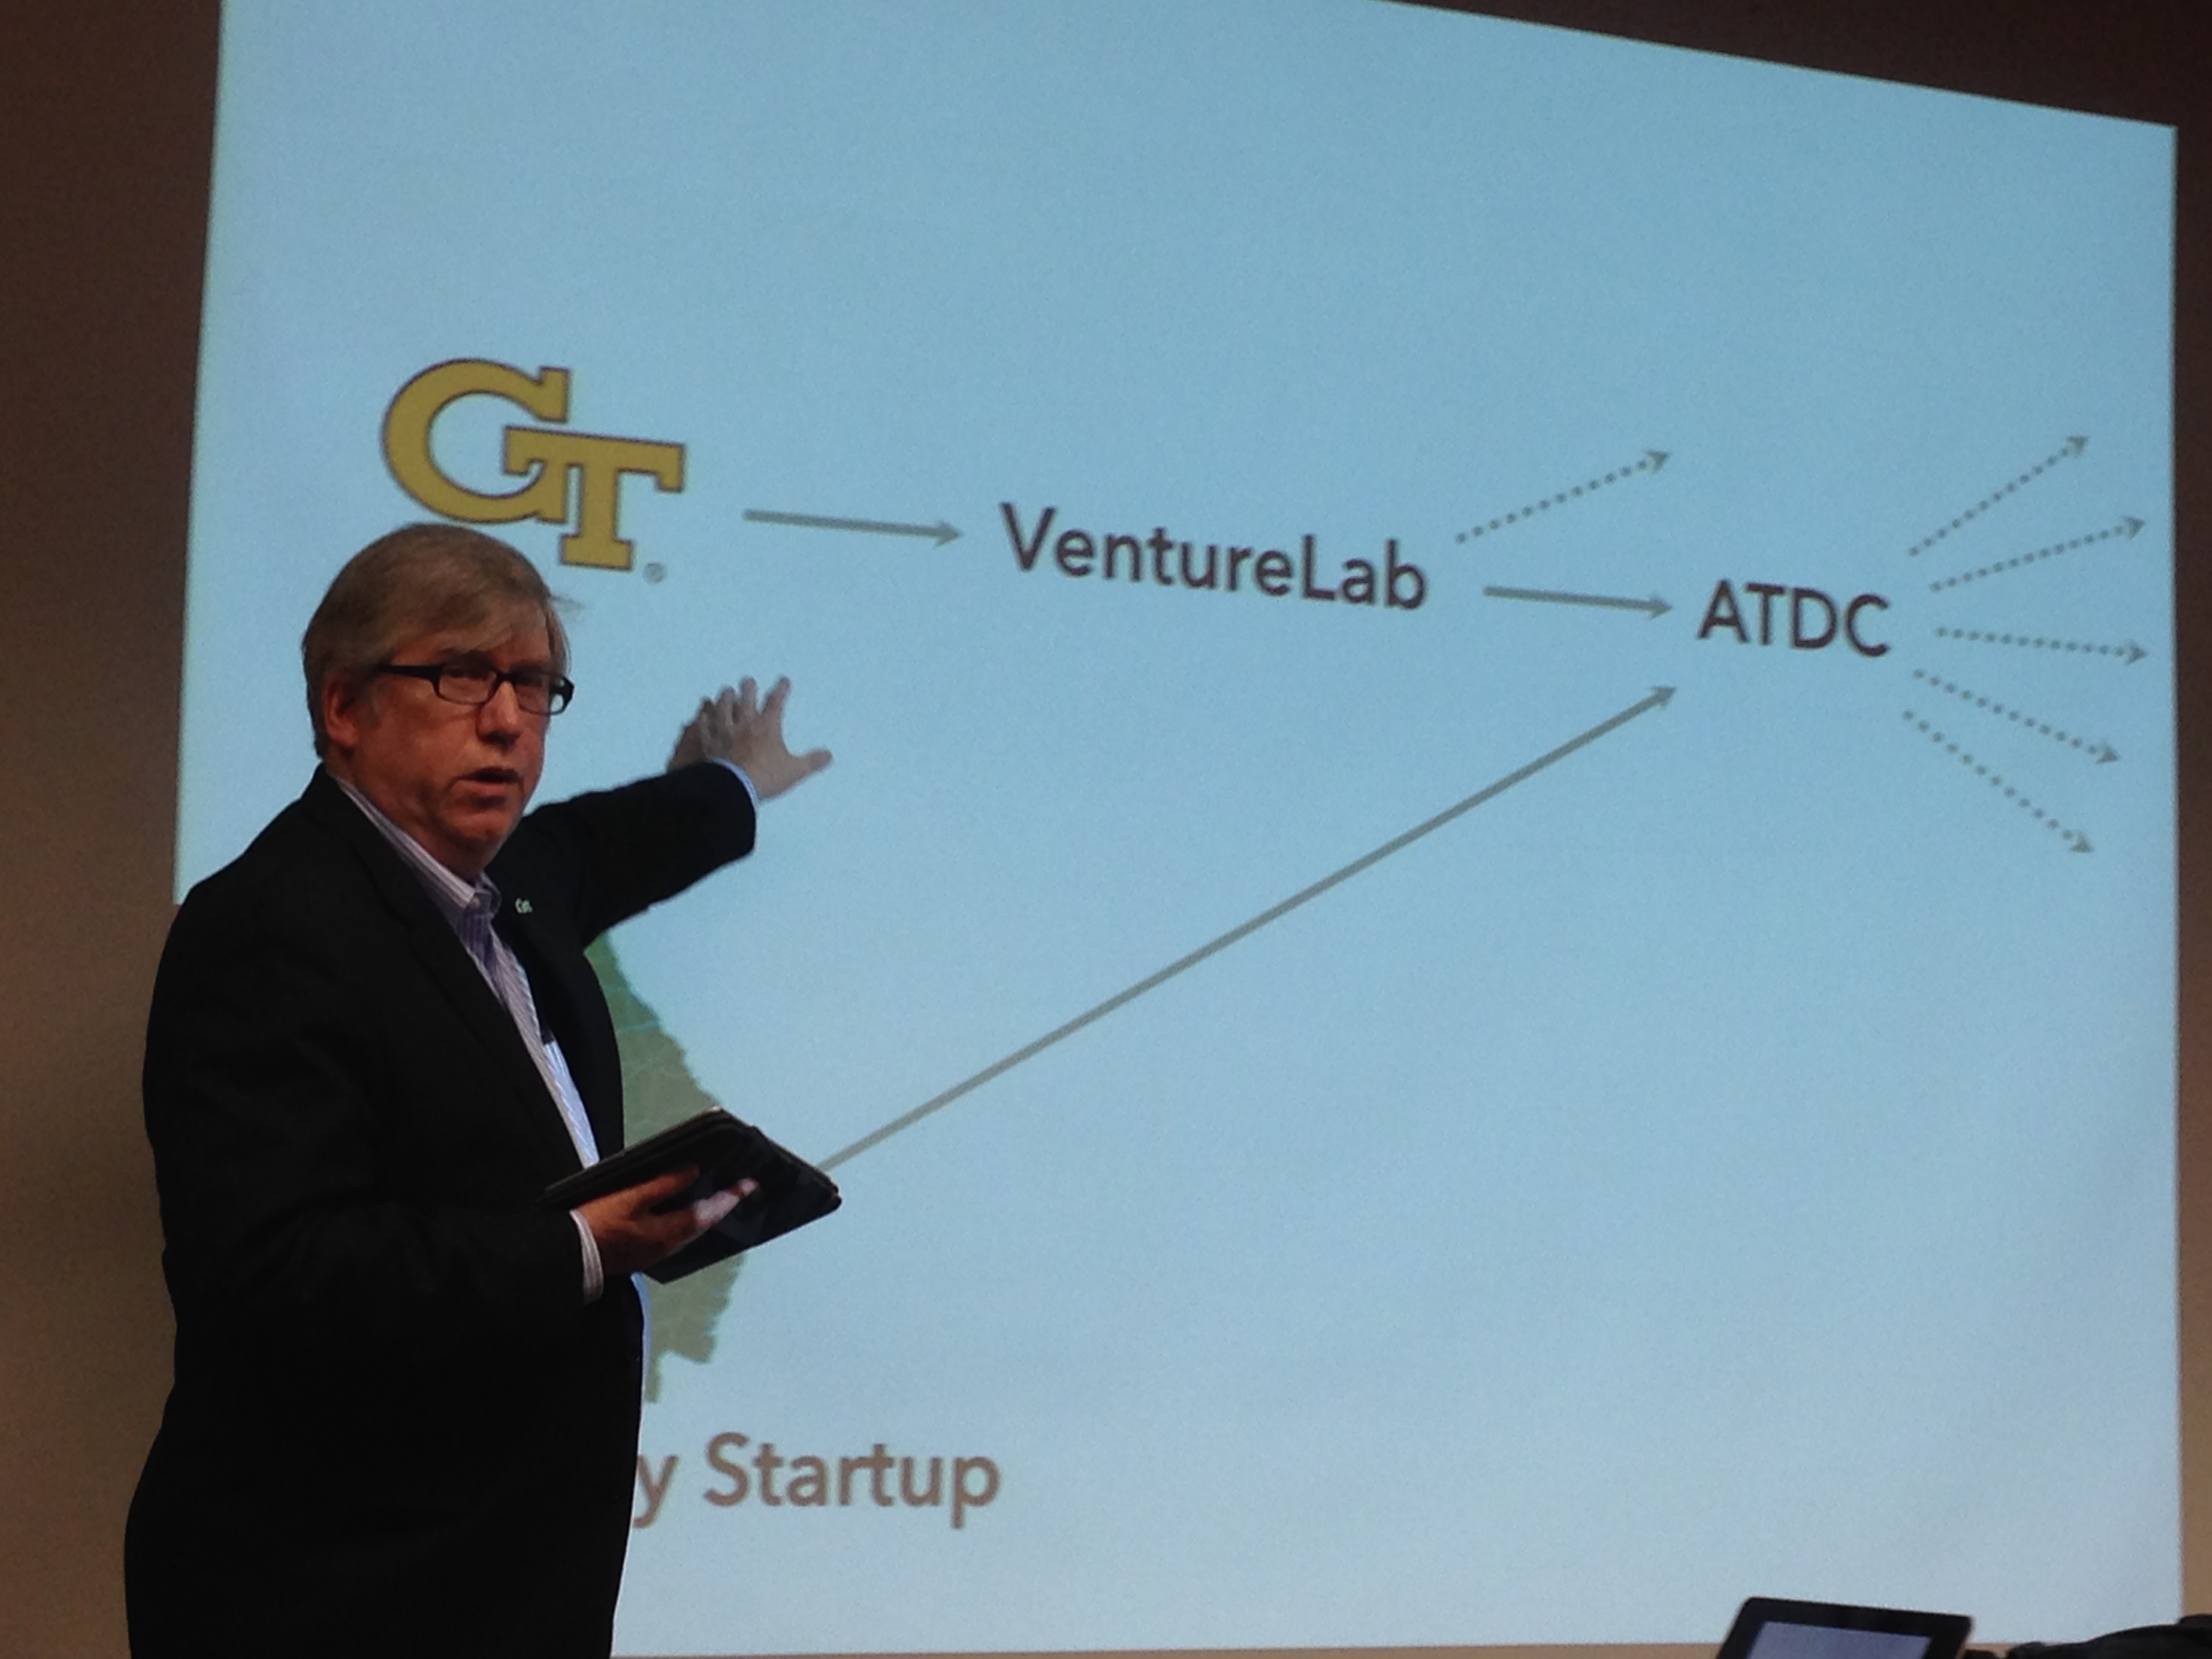 Keith McGreggor, director of VentureLab at Georgia Tech's Enterprise Innovation Institute, discusses customer discovery in a presentation at the Georgia Tech Manufacturing Institute on Oct. 13, 2014. McGreggor was recently selected to teach scientist-entrepreneurs on commercializing their innovations faster in a pilot program the National Institutes of Health launched this month. [Photo credit: Péralte C. Paul]